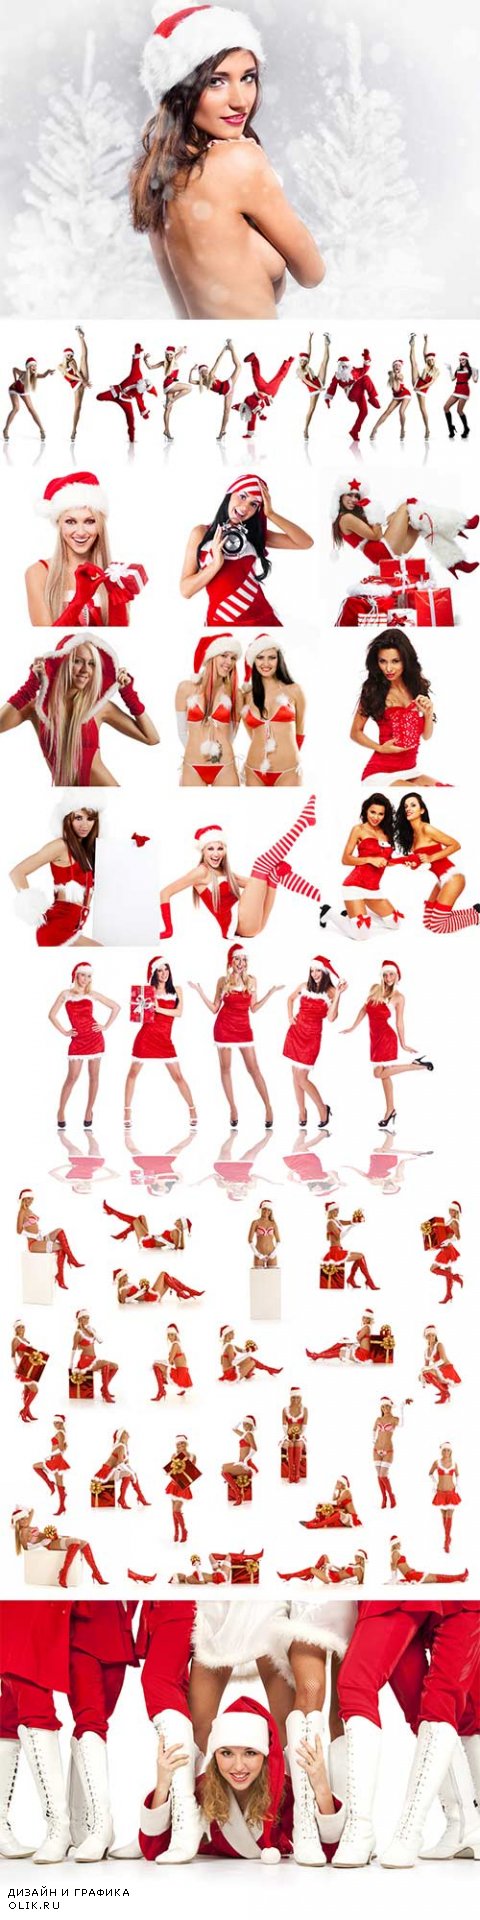 New year y girls raster clipart - 3